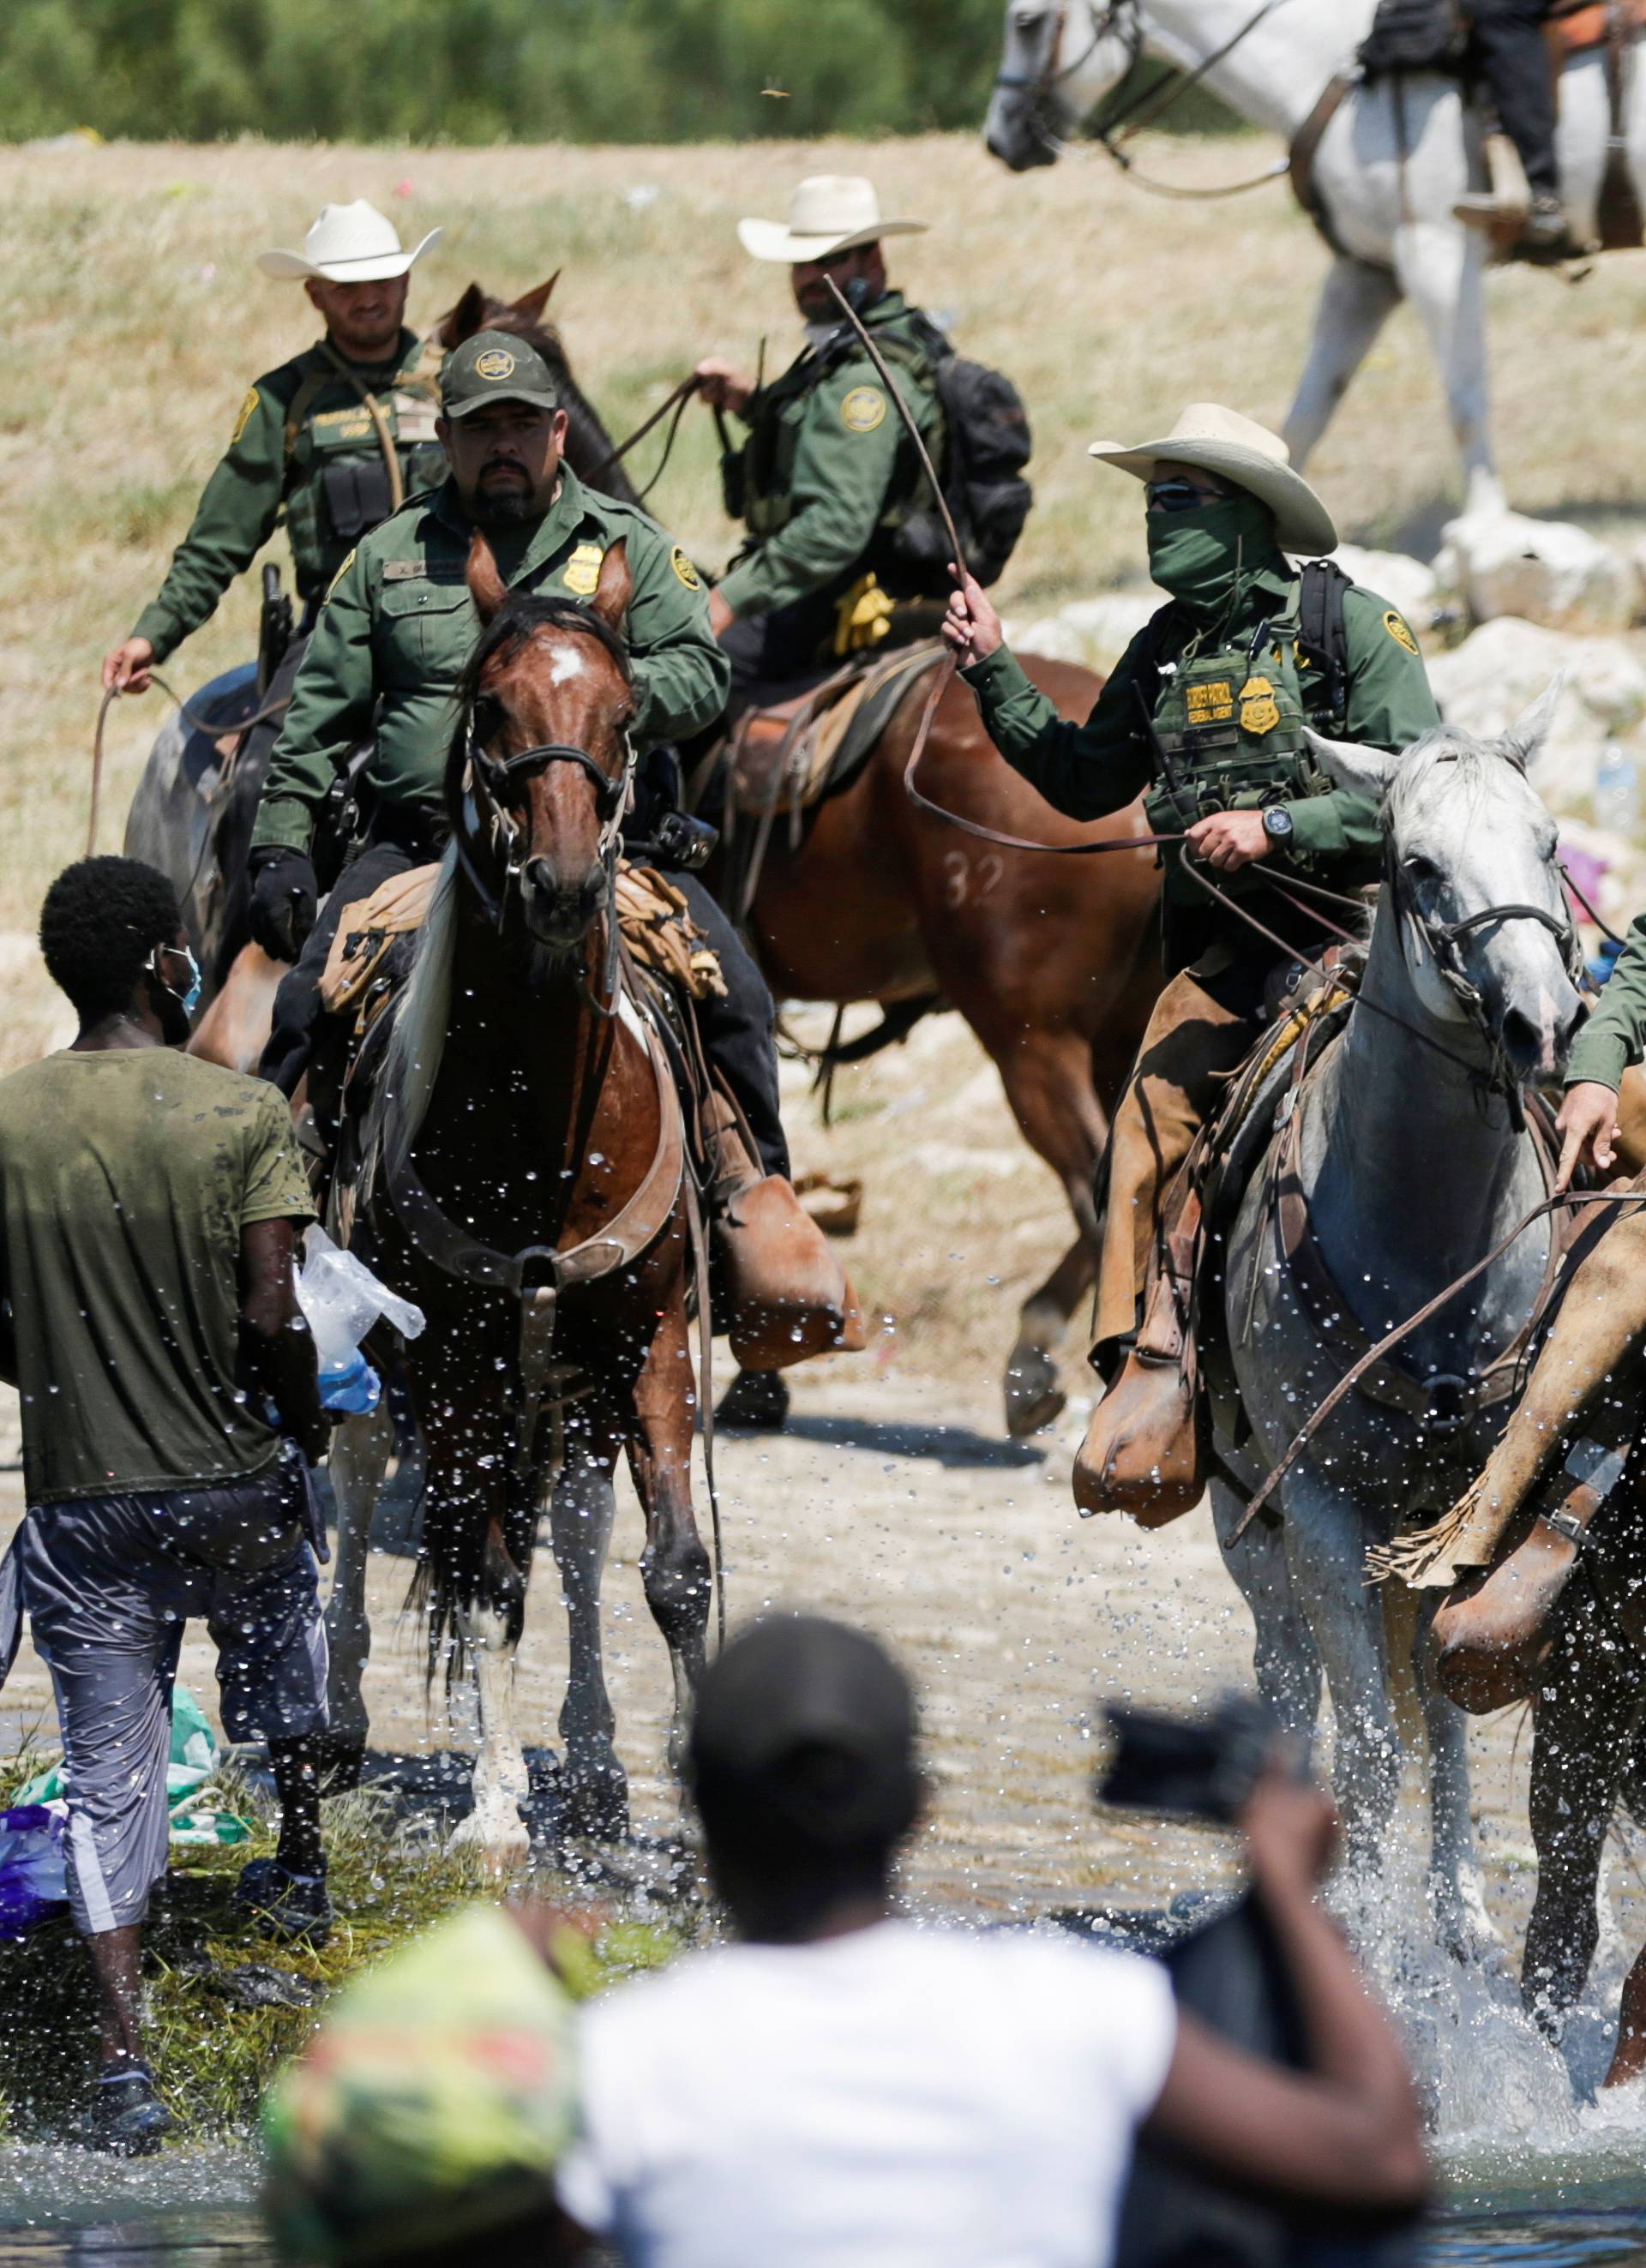 Migrants collecting food try to evade law enforcement at the U.S.-Mexico border